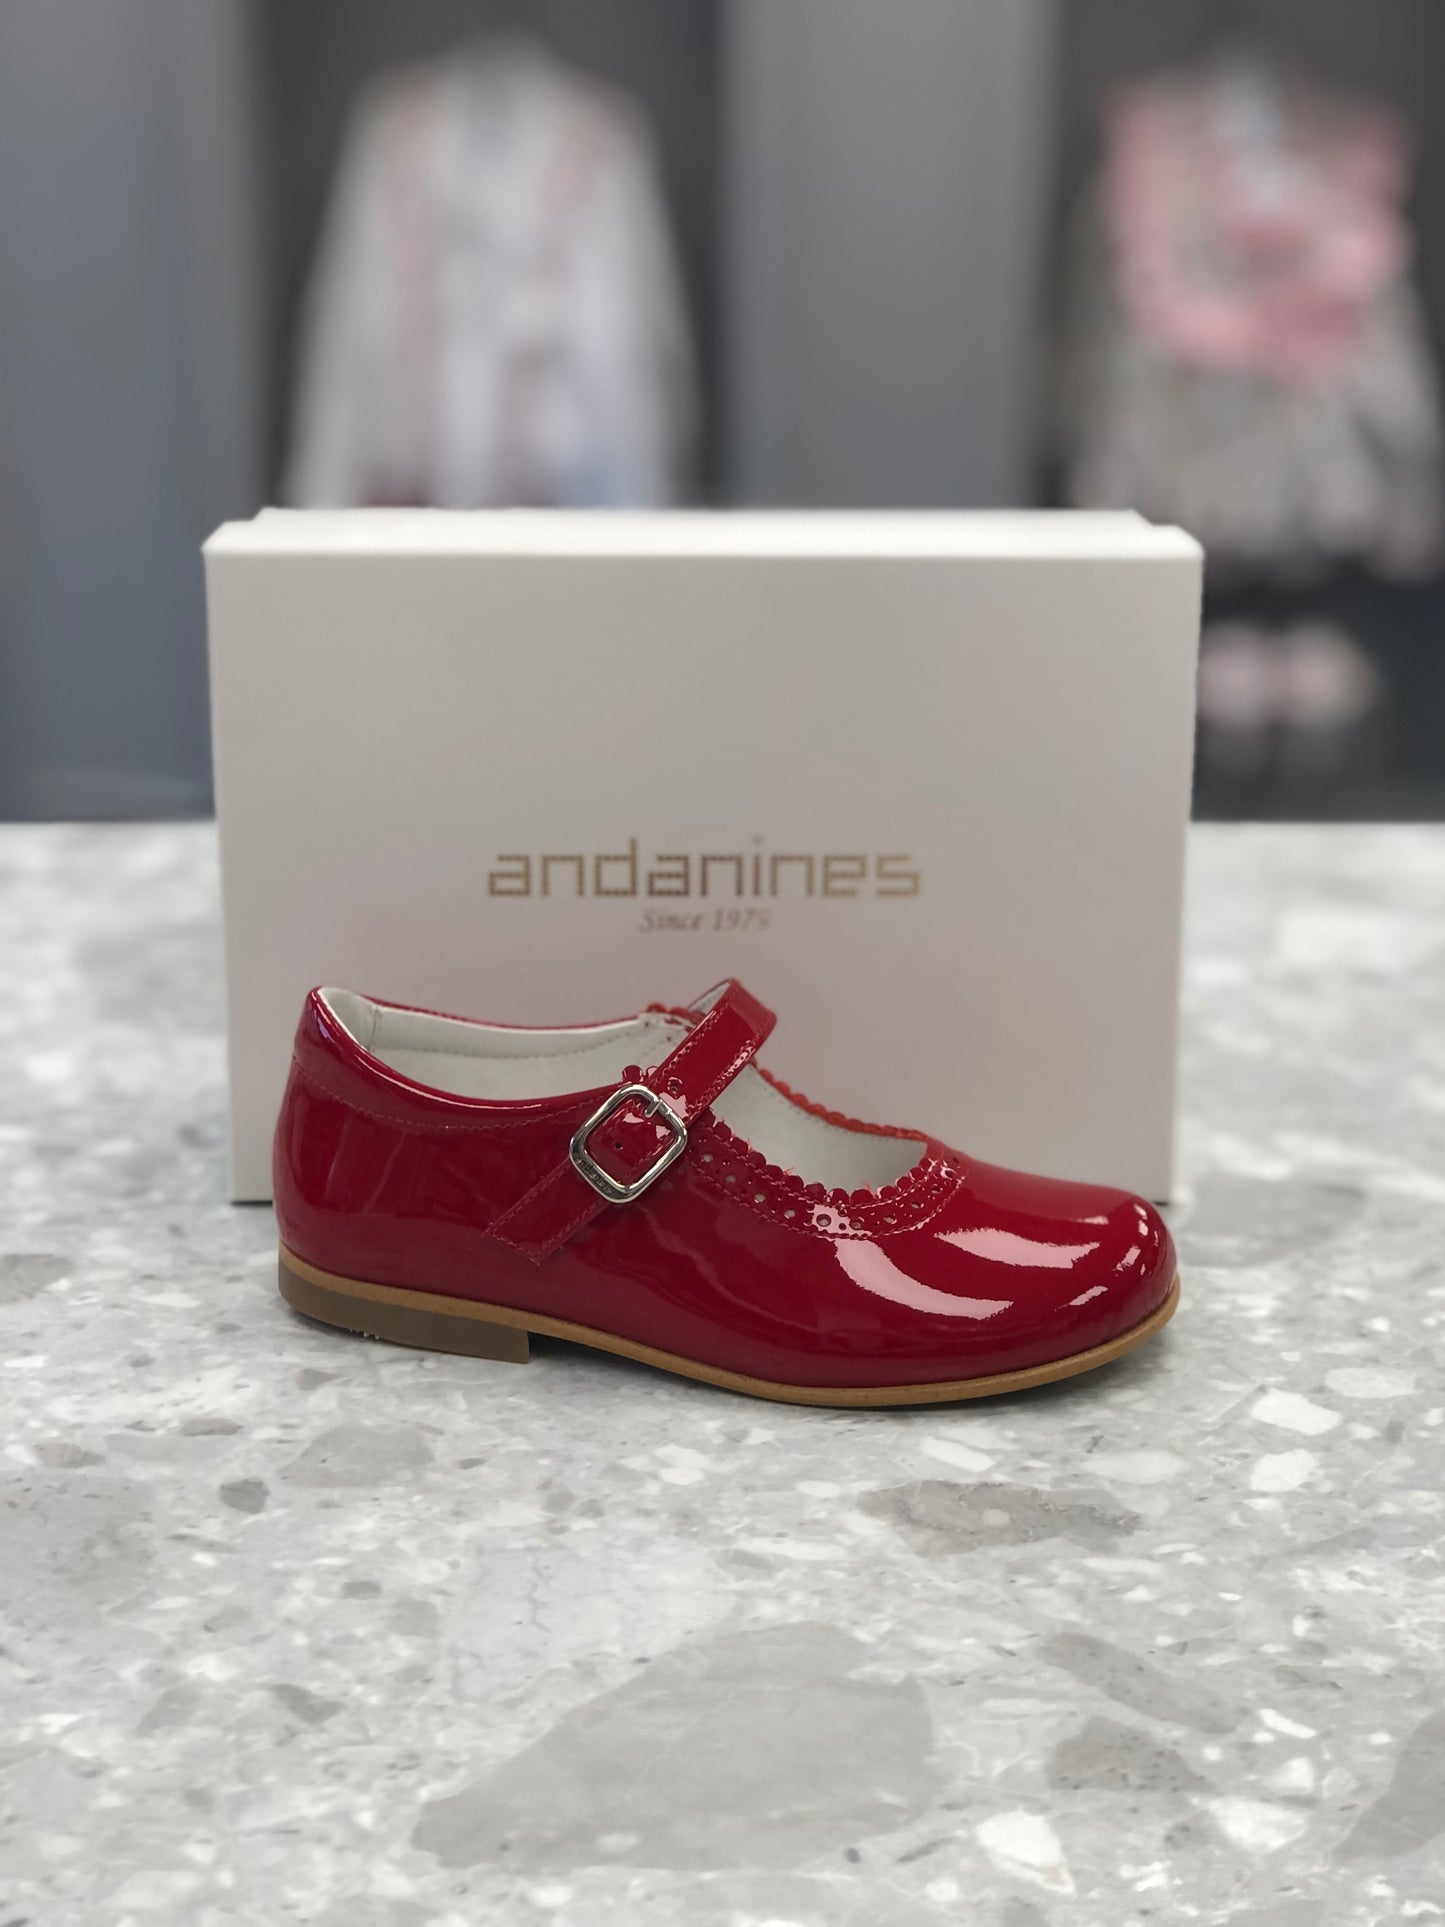 ANDANINES Girls Red Patent Leather Mary Jane Shoes